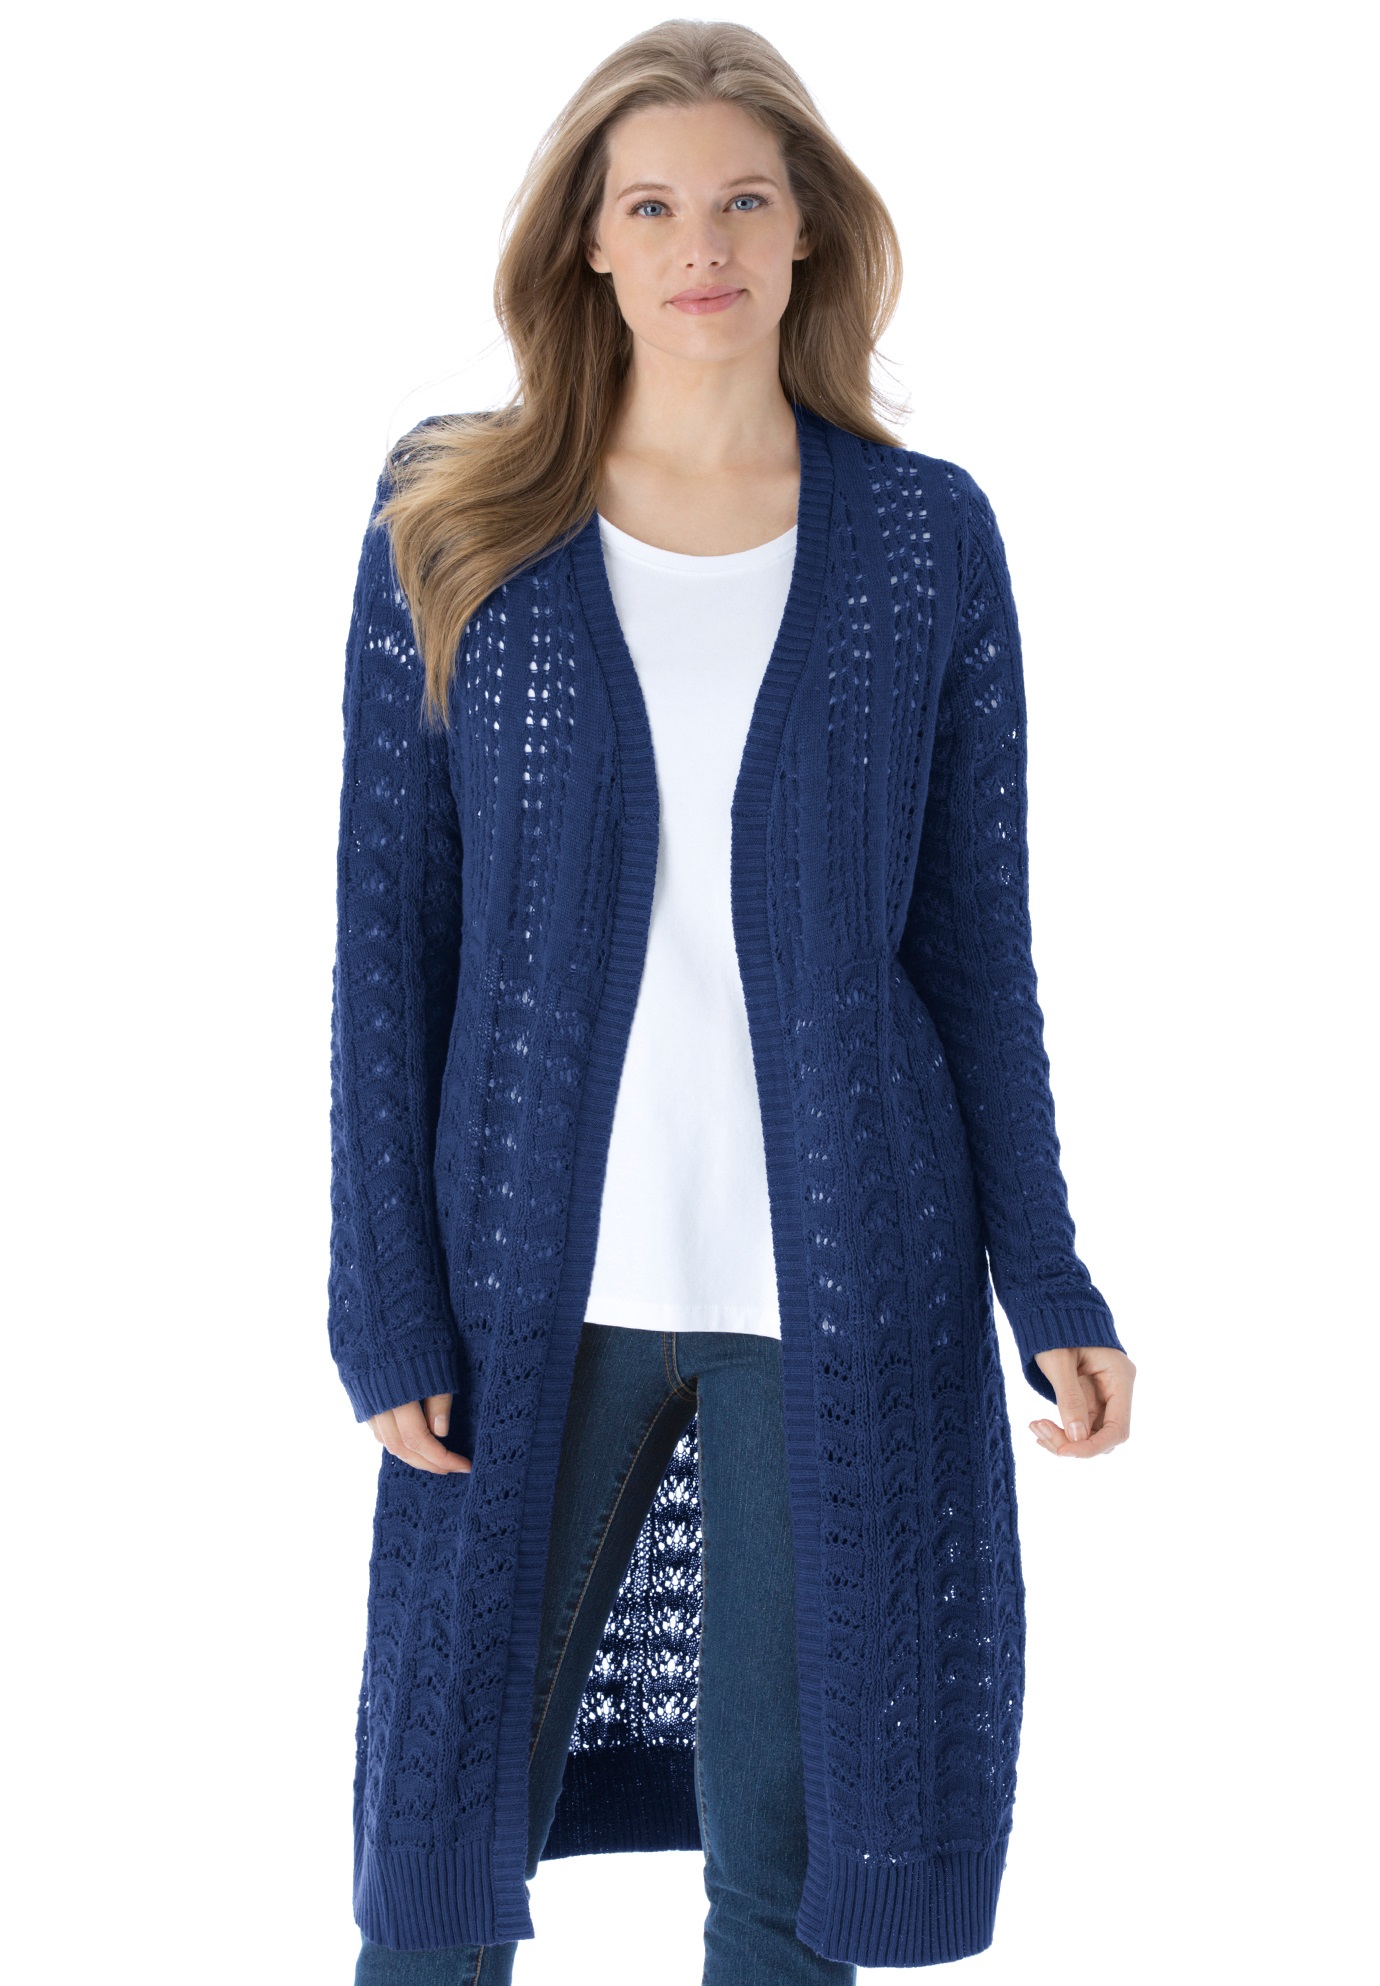 Pointelle Duster Cardigan Sweater| Plus Size Tops | Woman Within